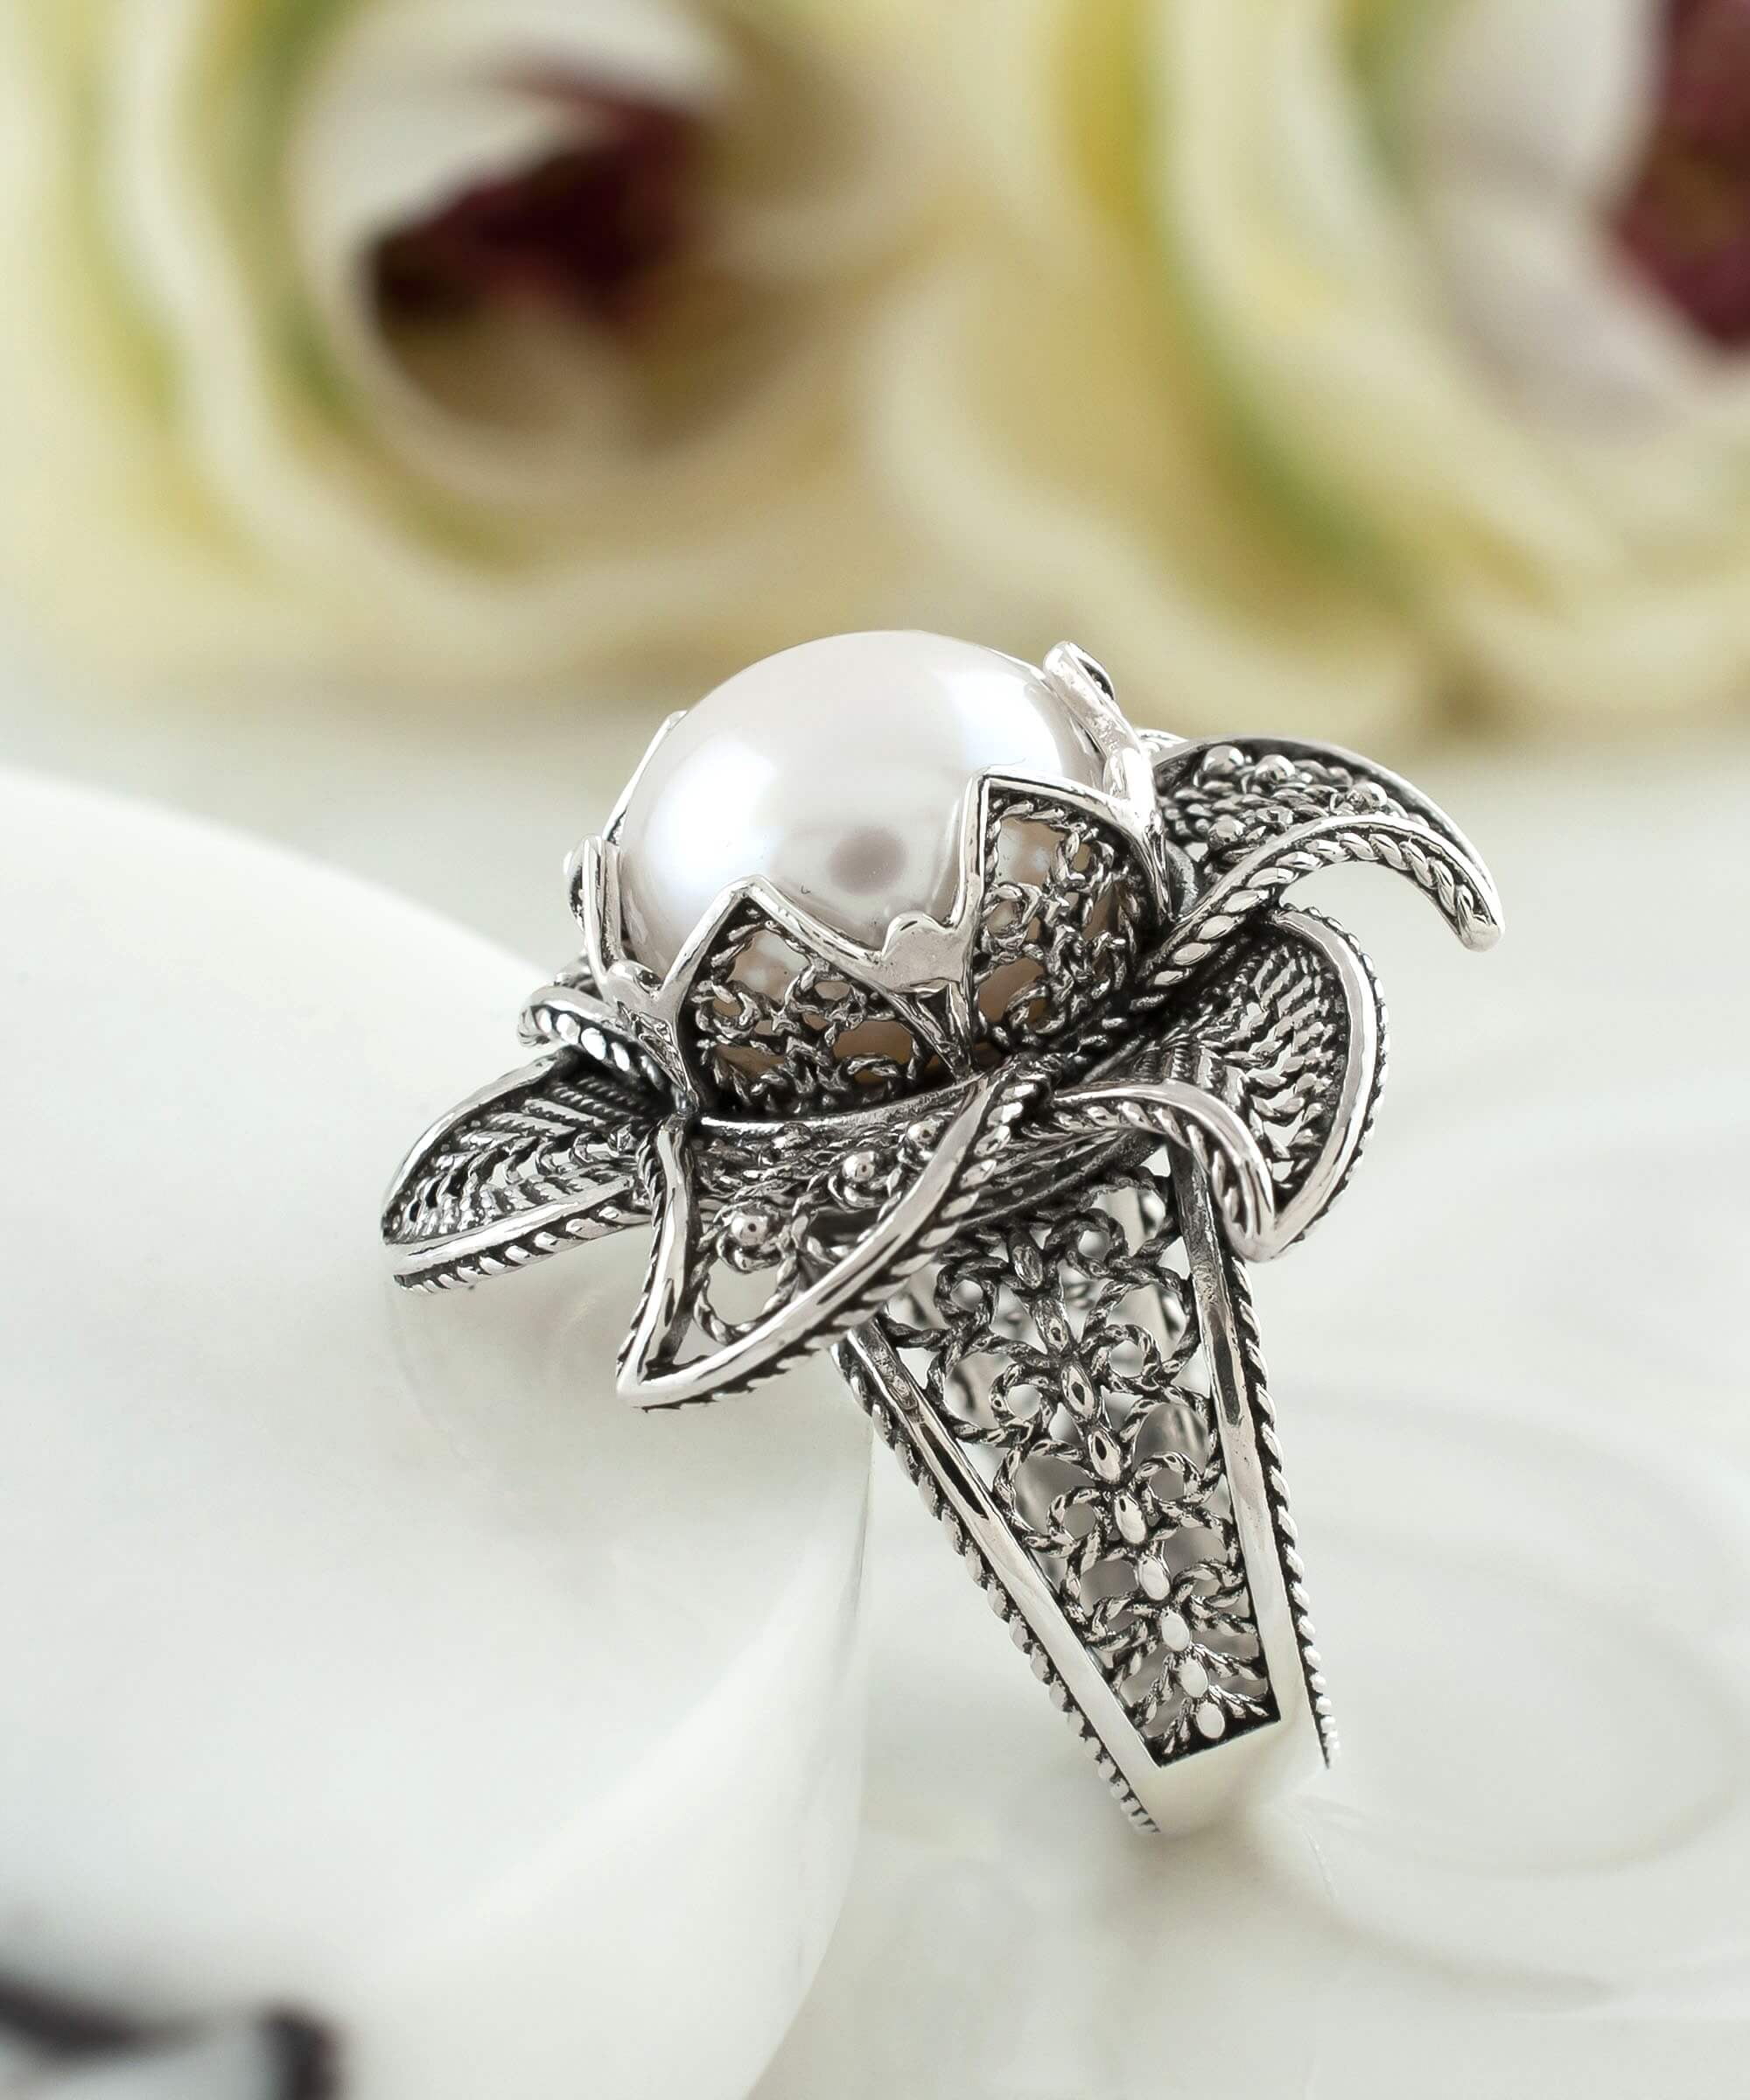 CLARA 925 Sterling Silver Lotus Toe Rings Pair Size Adjustable Gift fo